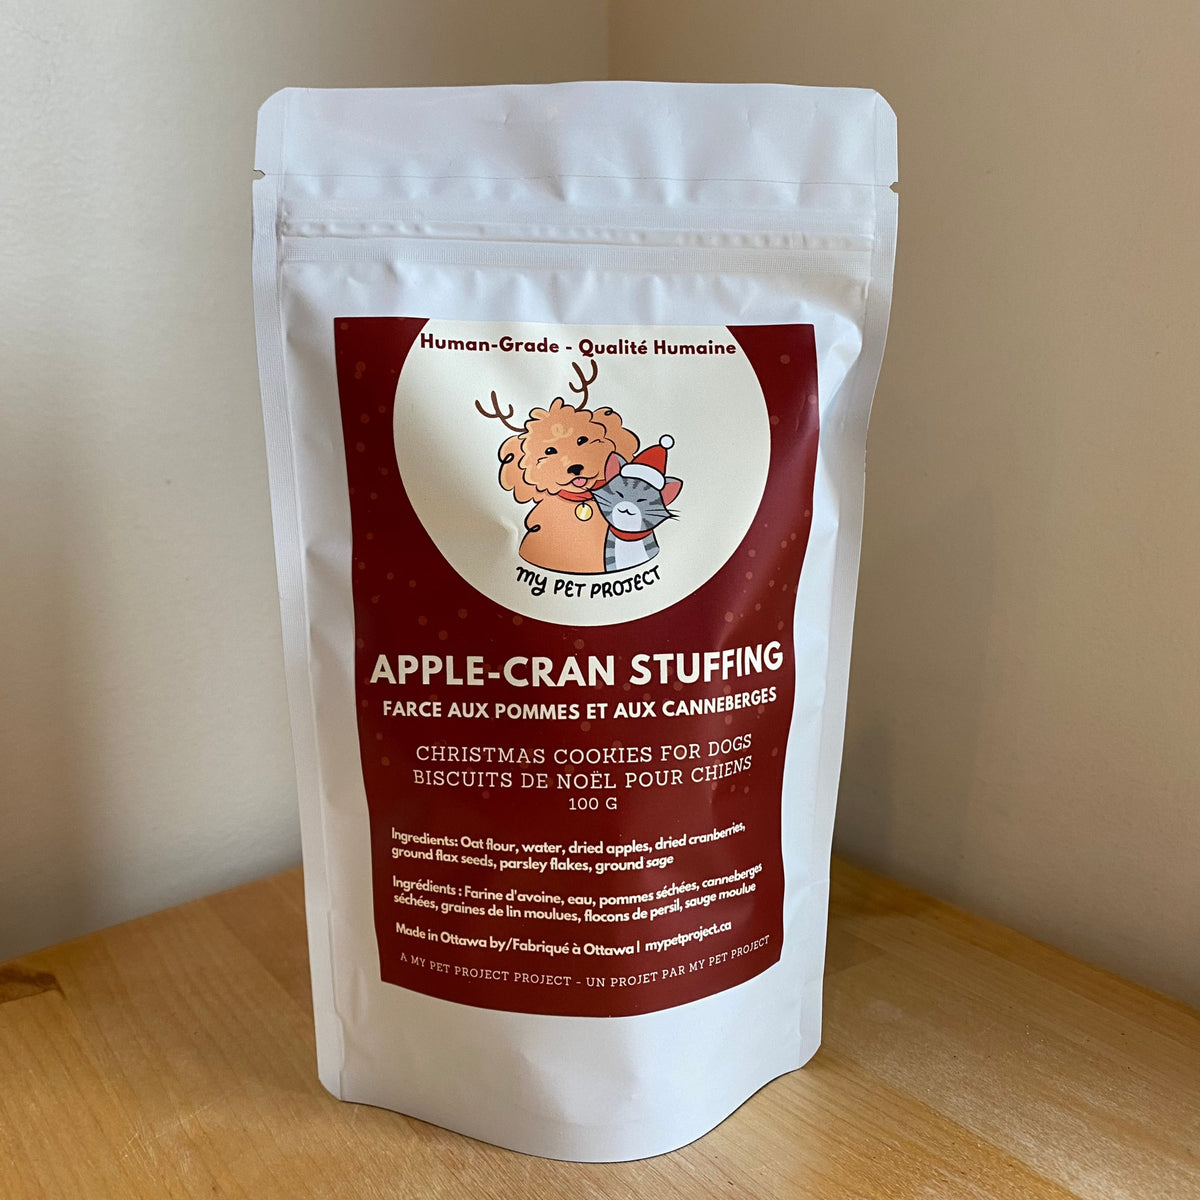 My Pet Project Dog Cookies: Apple Cran Stuffing